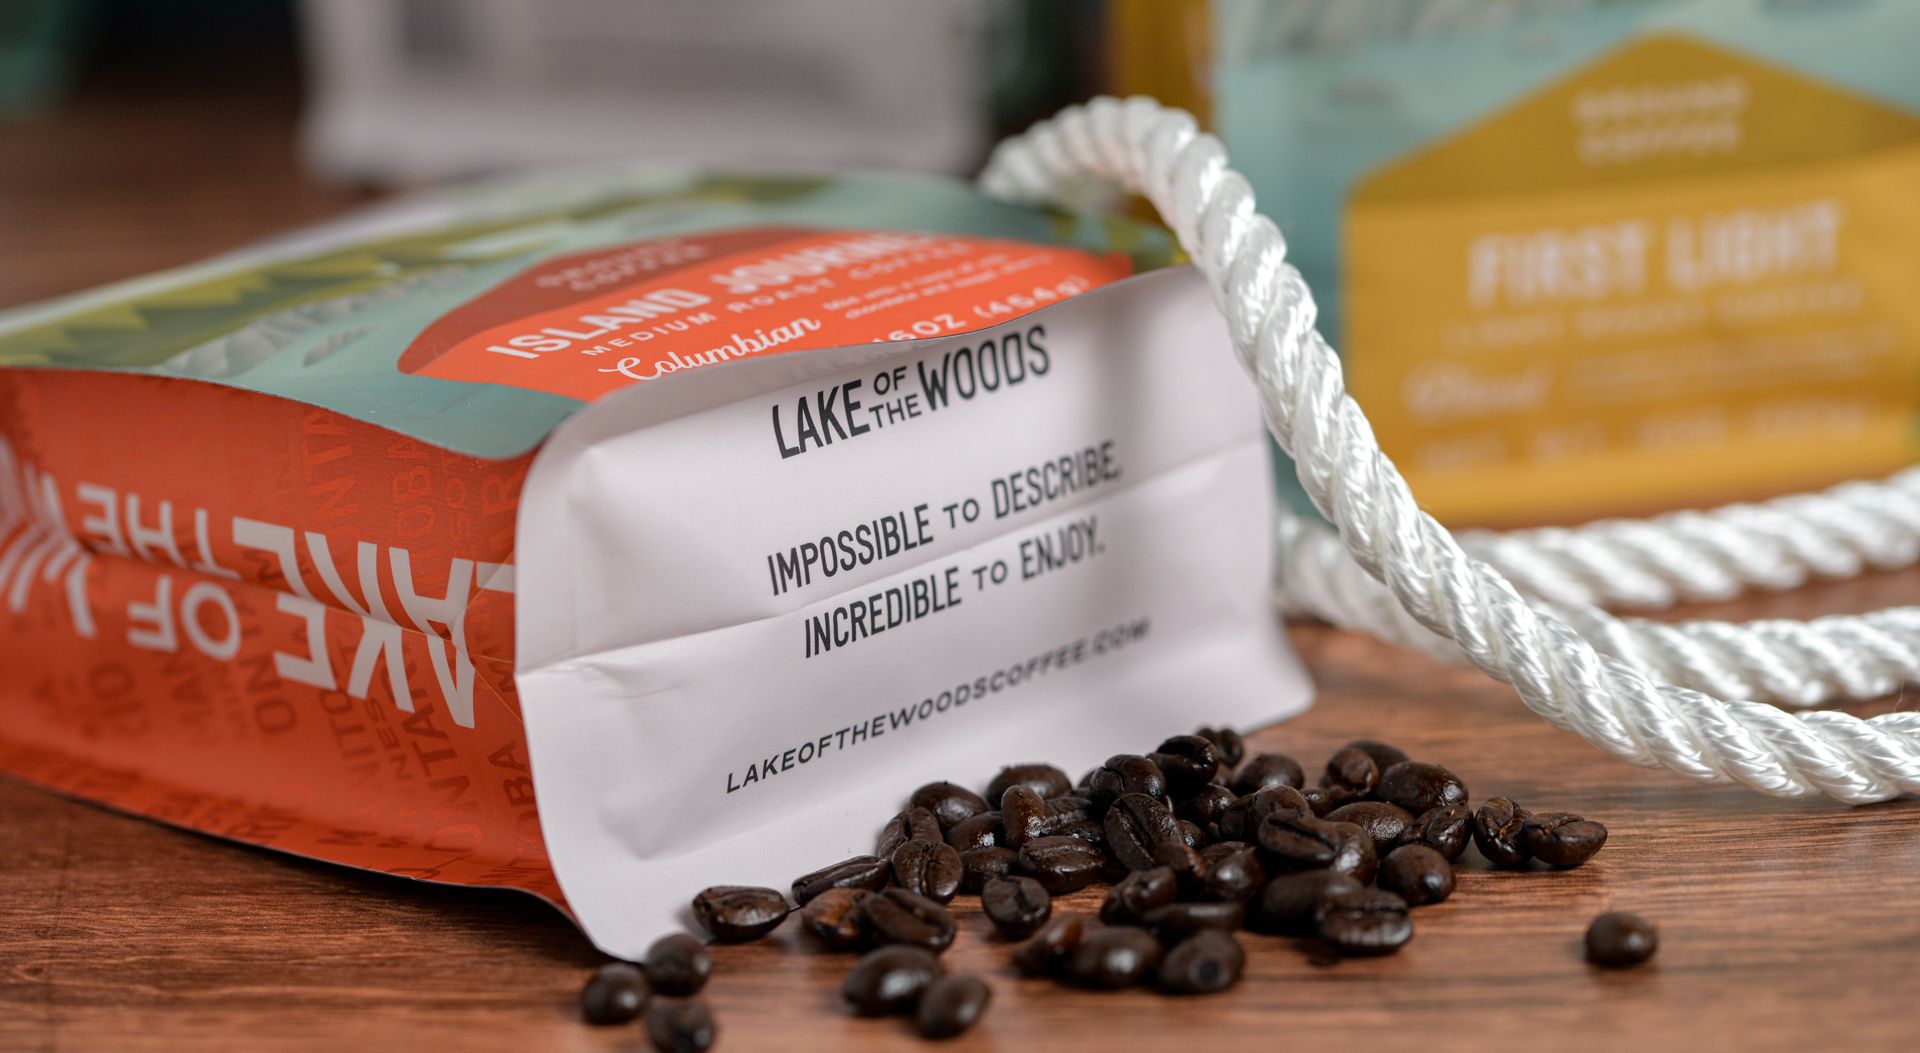 Lake of the Woods packaging